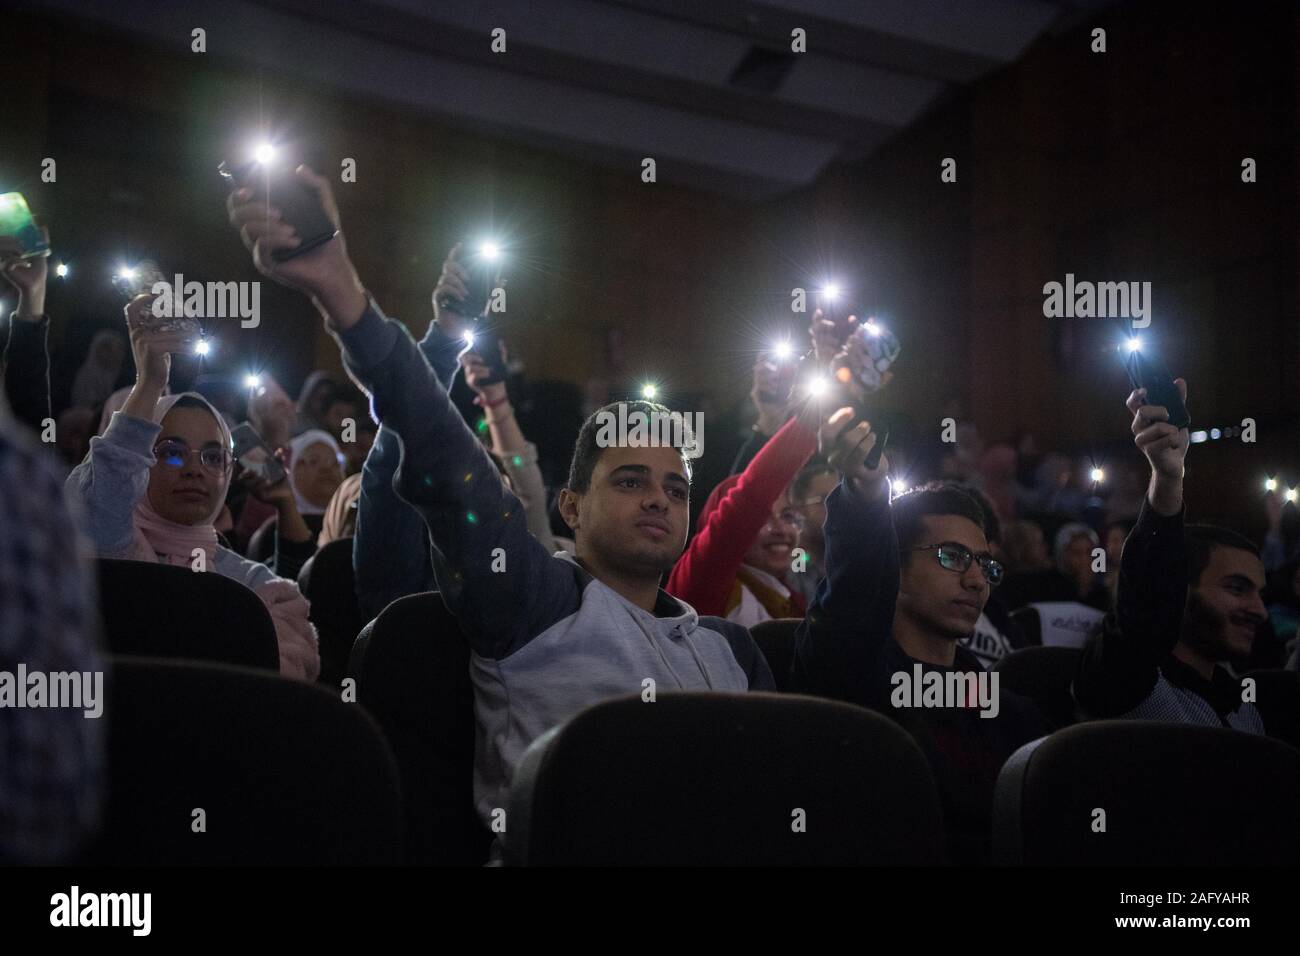 (191217) -- ISMAILIA, Dec. 17, 2019 (Xinhua) -- People wave their cellphones as they watch a contest of dubbing films in the Chinese language held in Ismailia Province, Egypt, on Dec. 16, 2019. The Confucius Institute at the Suez Canal University of Egypt has hosted a contest of dubbing films in the Chinese language among the Egyptian university students. TO GO WITH 'Egyptian students compete in first contest of dubbing Chinese films' (Xinhua/Wu Huiwo) Stock Photo